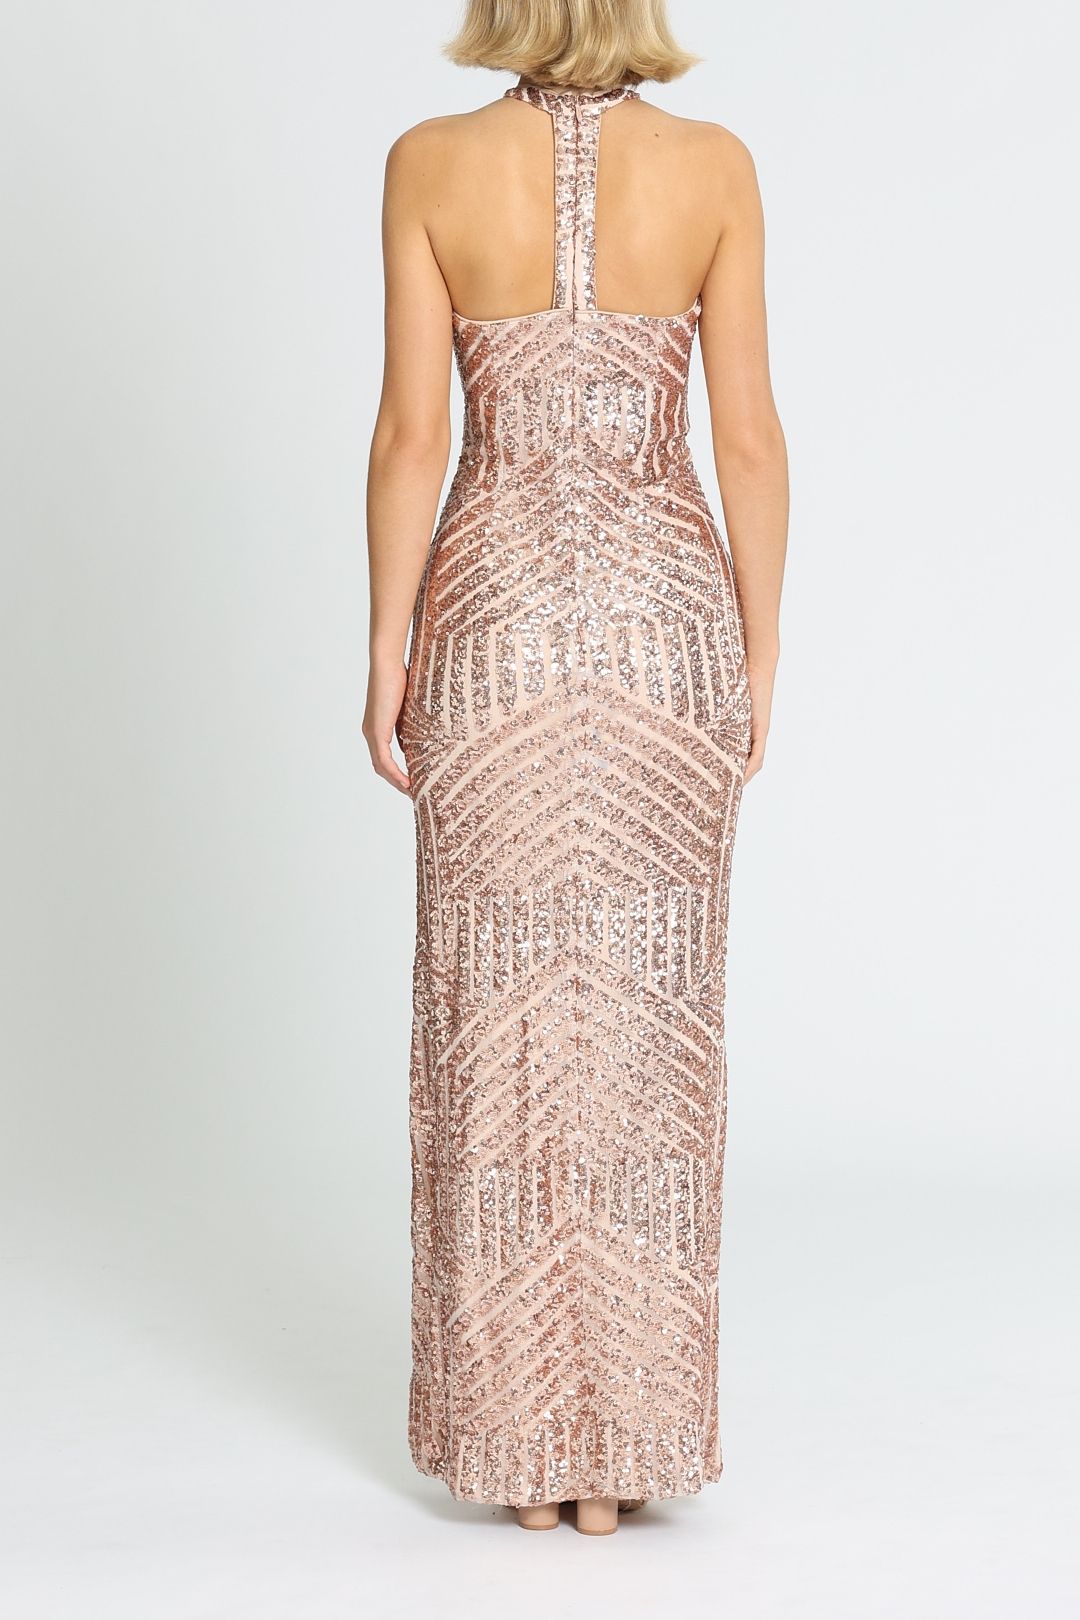 L'Amour Diana Halter Gown Blush Bodycon